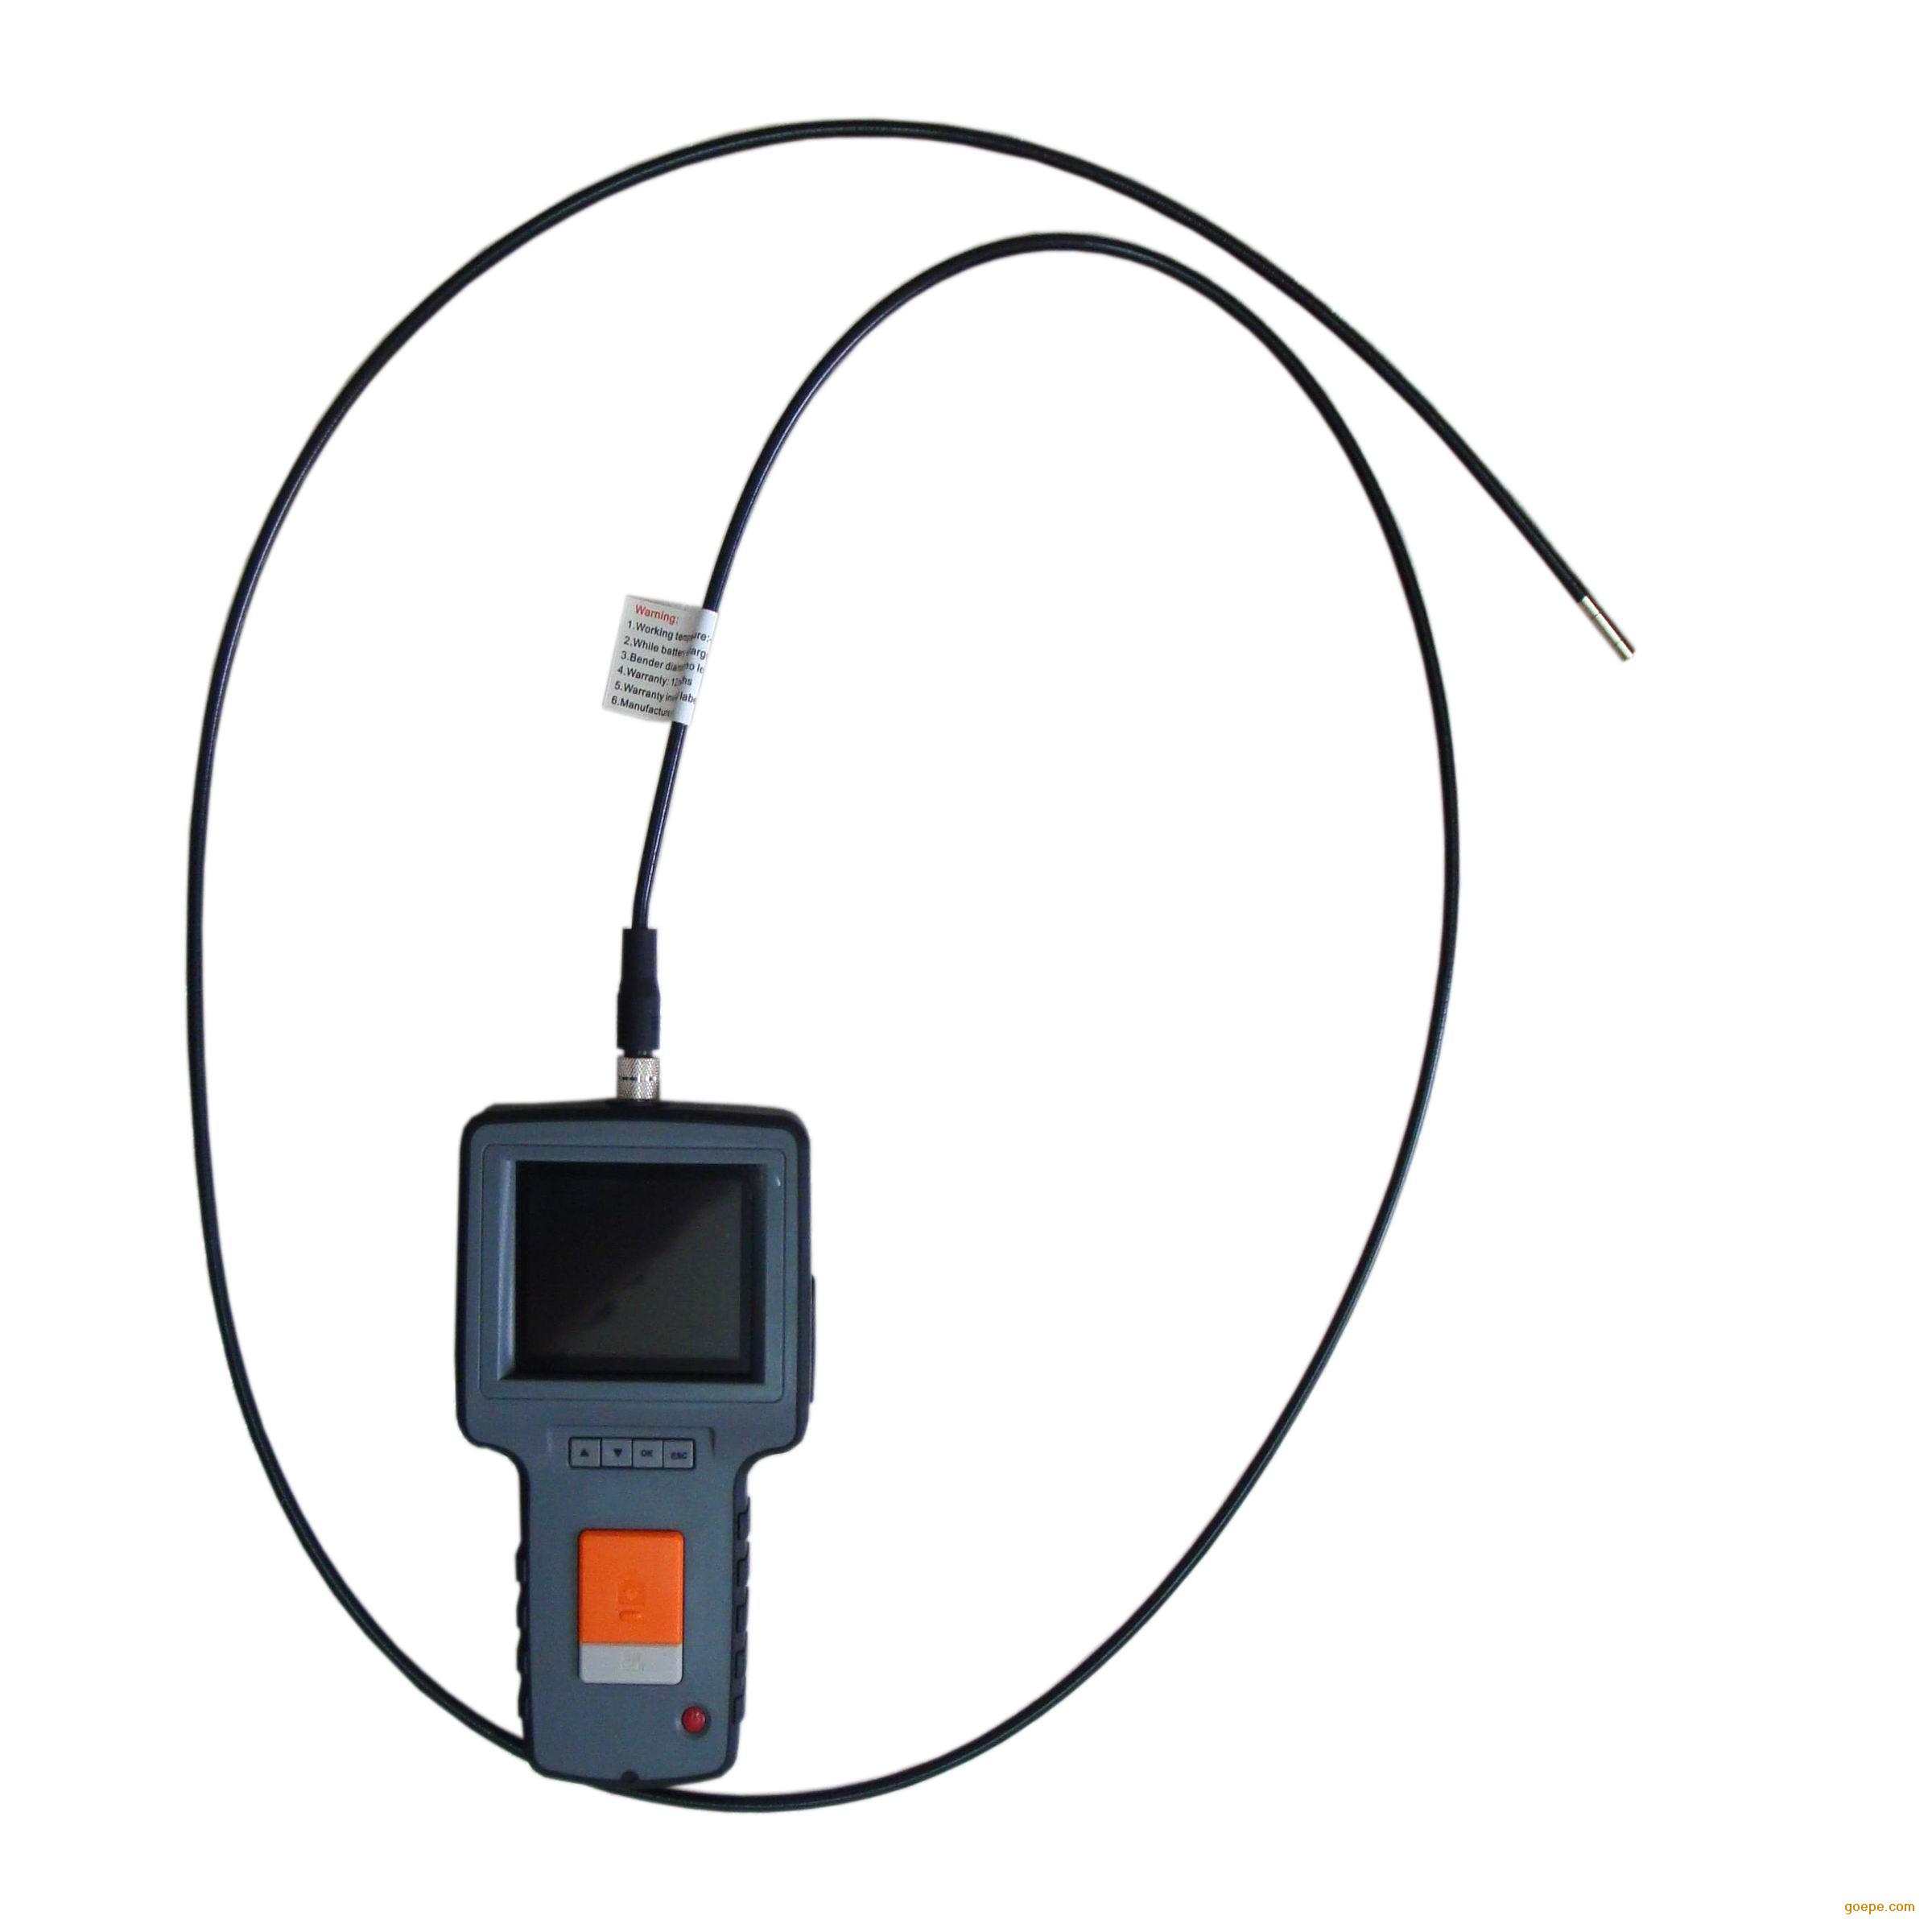 Waterproof Portable deep well under vehicle inspection camera industrial endoscope video borescope with 5.5mm side view camera